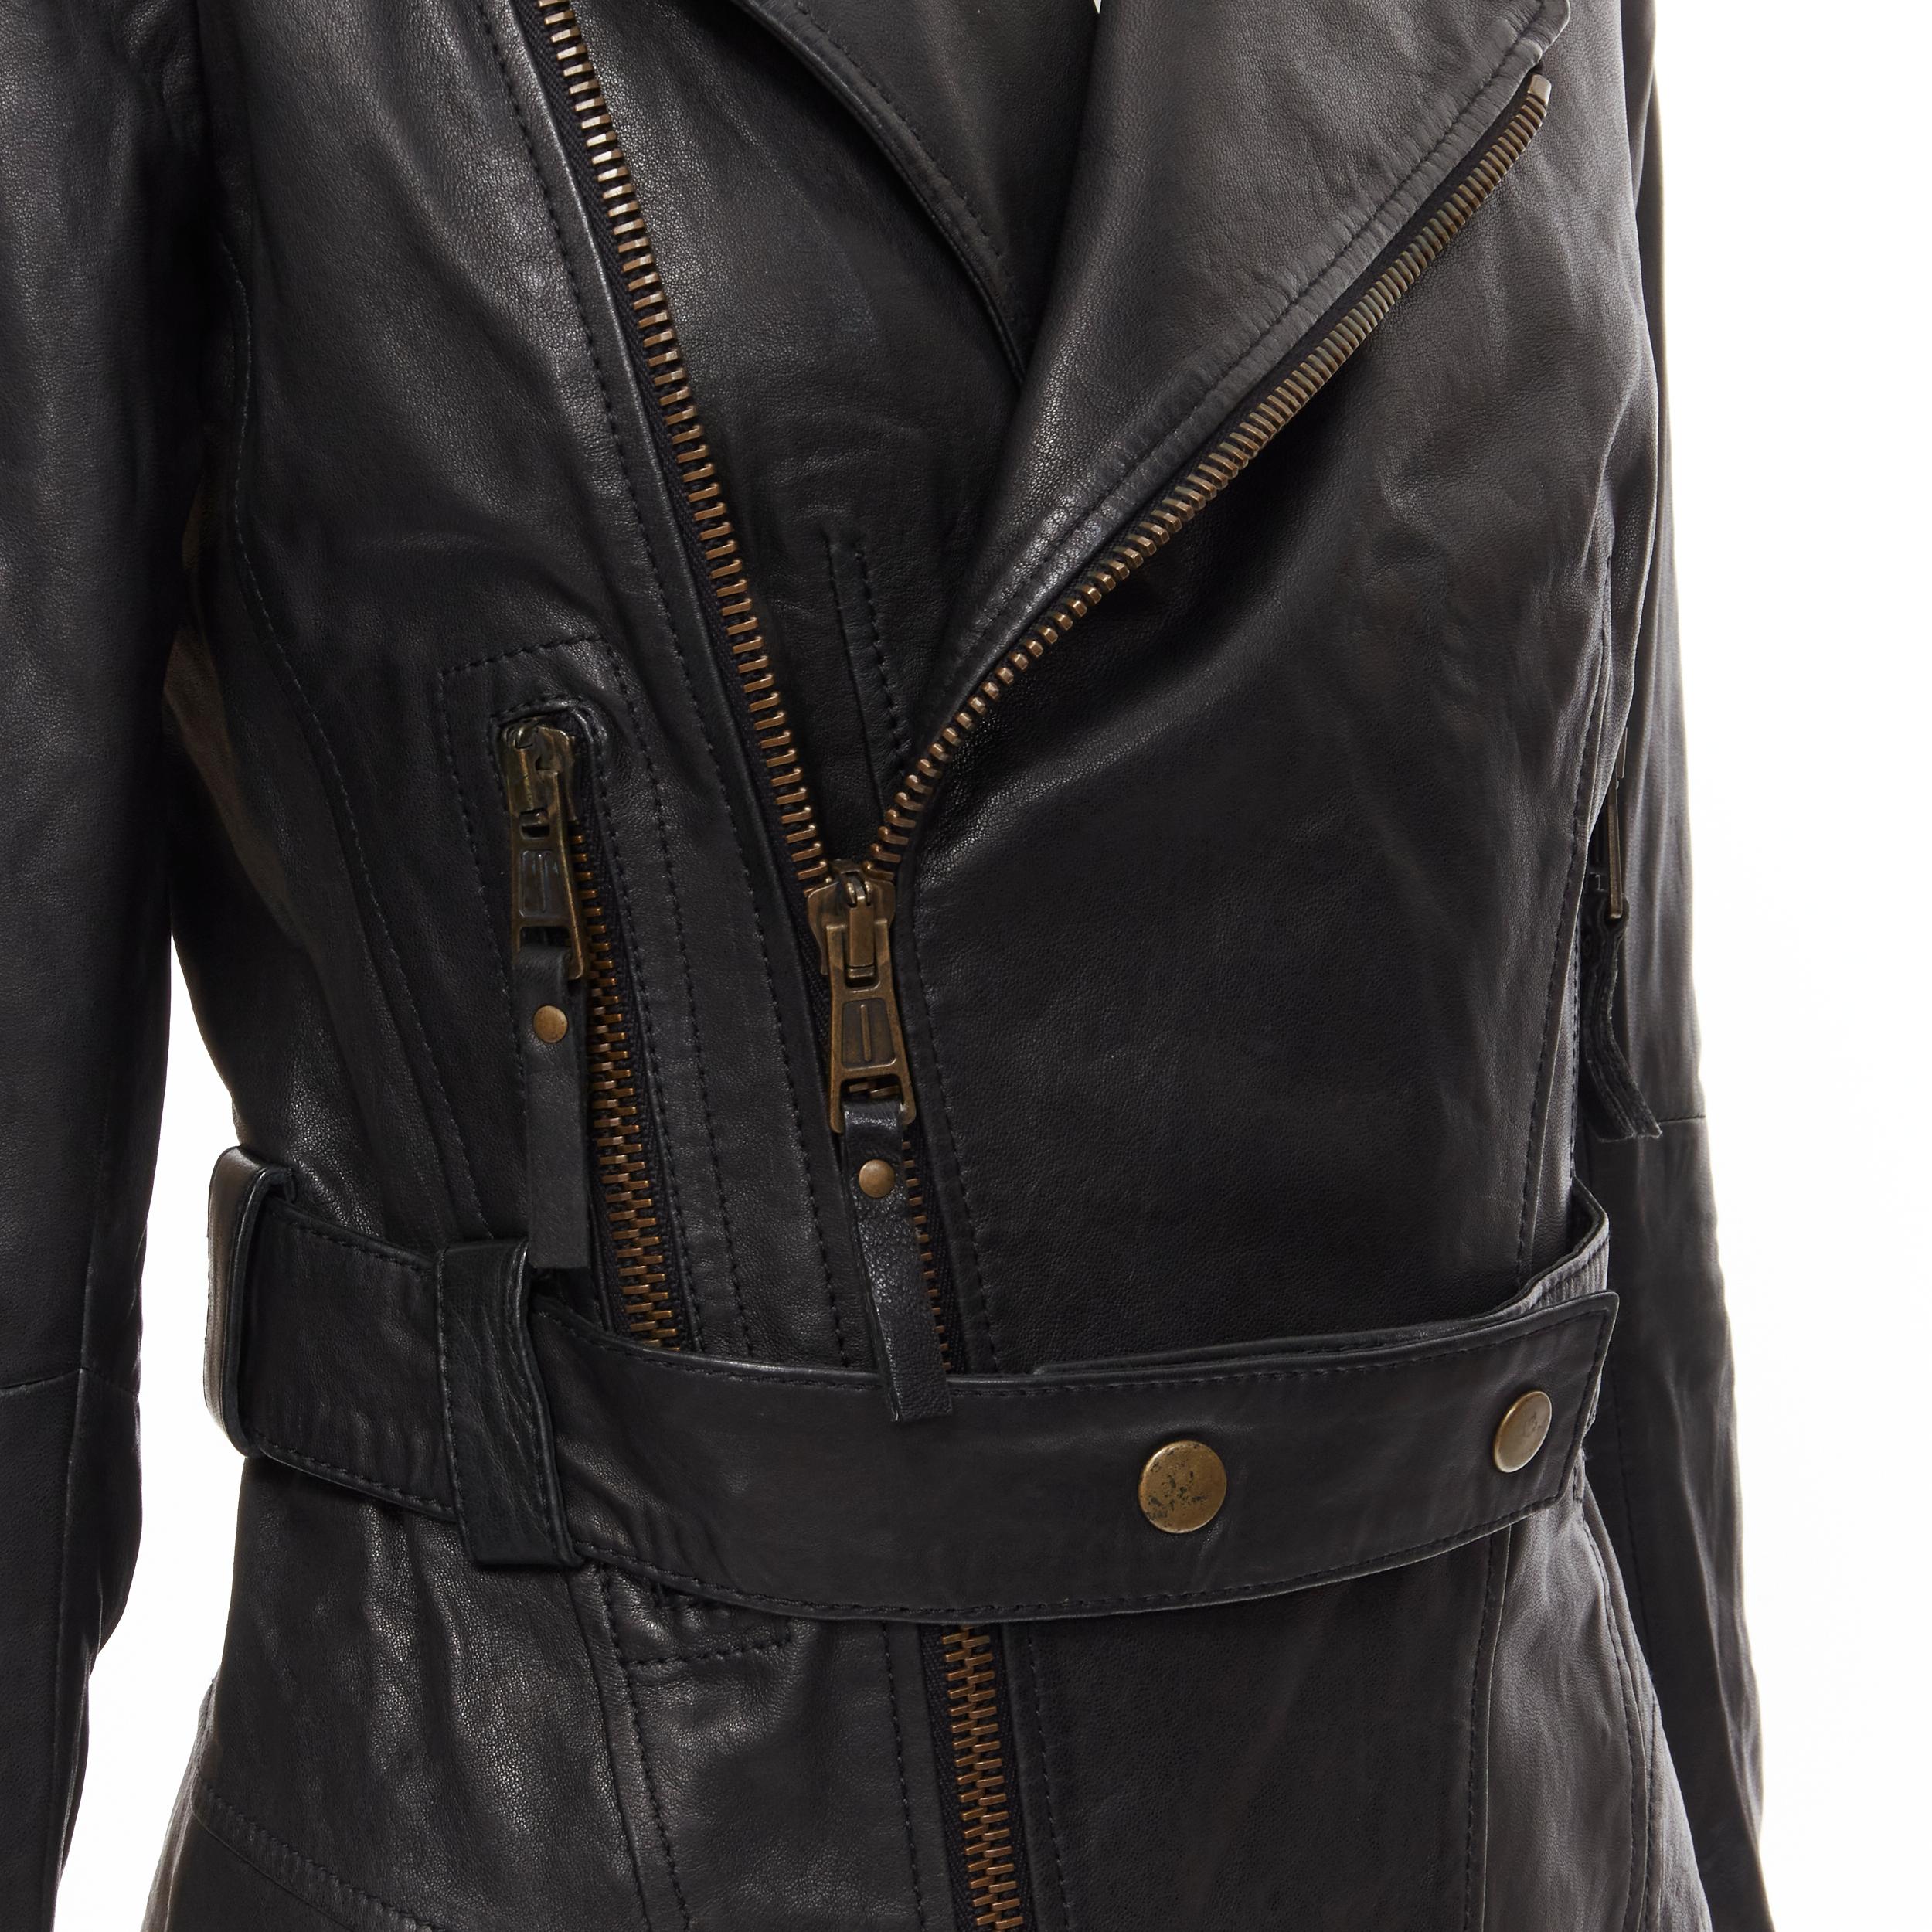 BALENCIAGA 2009 black lambskin leather asymmetric collar belted biker jacket FR36 XS 
Reference: MELK/A00011 
Brand: Balenciaga 
Designer: Nicolas Ghesquiere 
Collection: 2009 
Material: Leather 
Color: Black 
Pattern: Solid 
Closure: Zip 
Extra